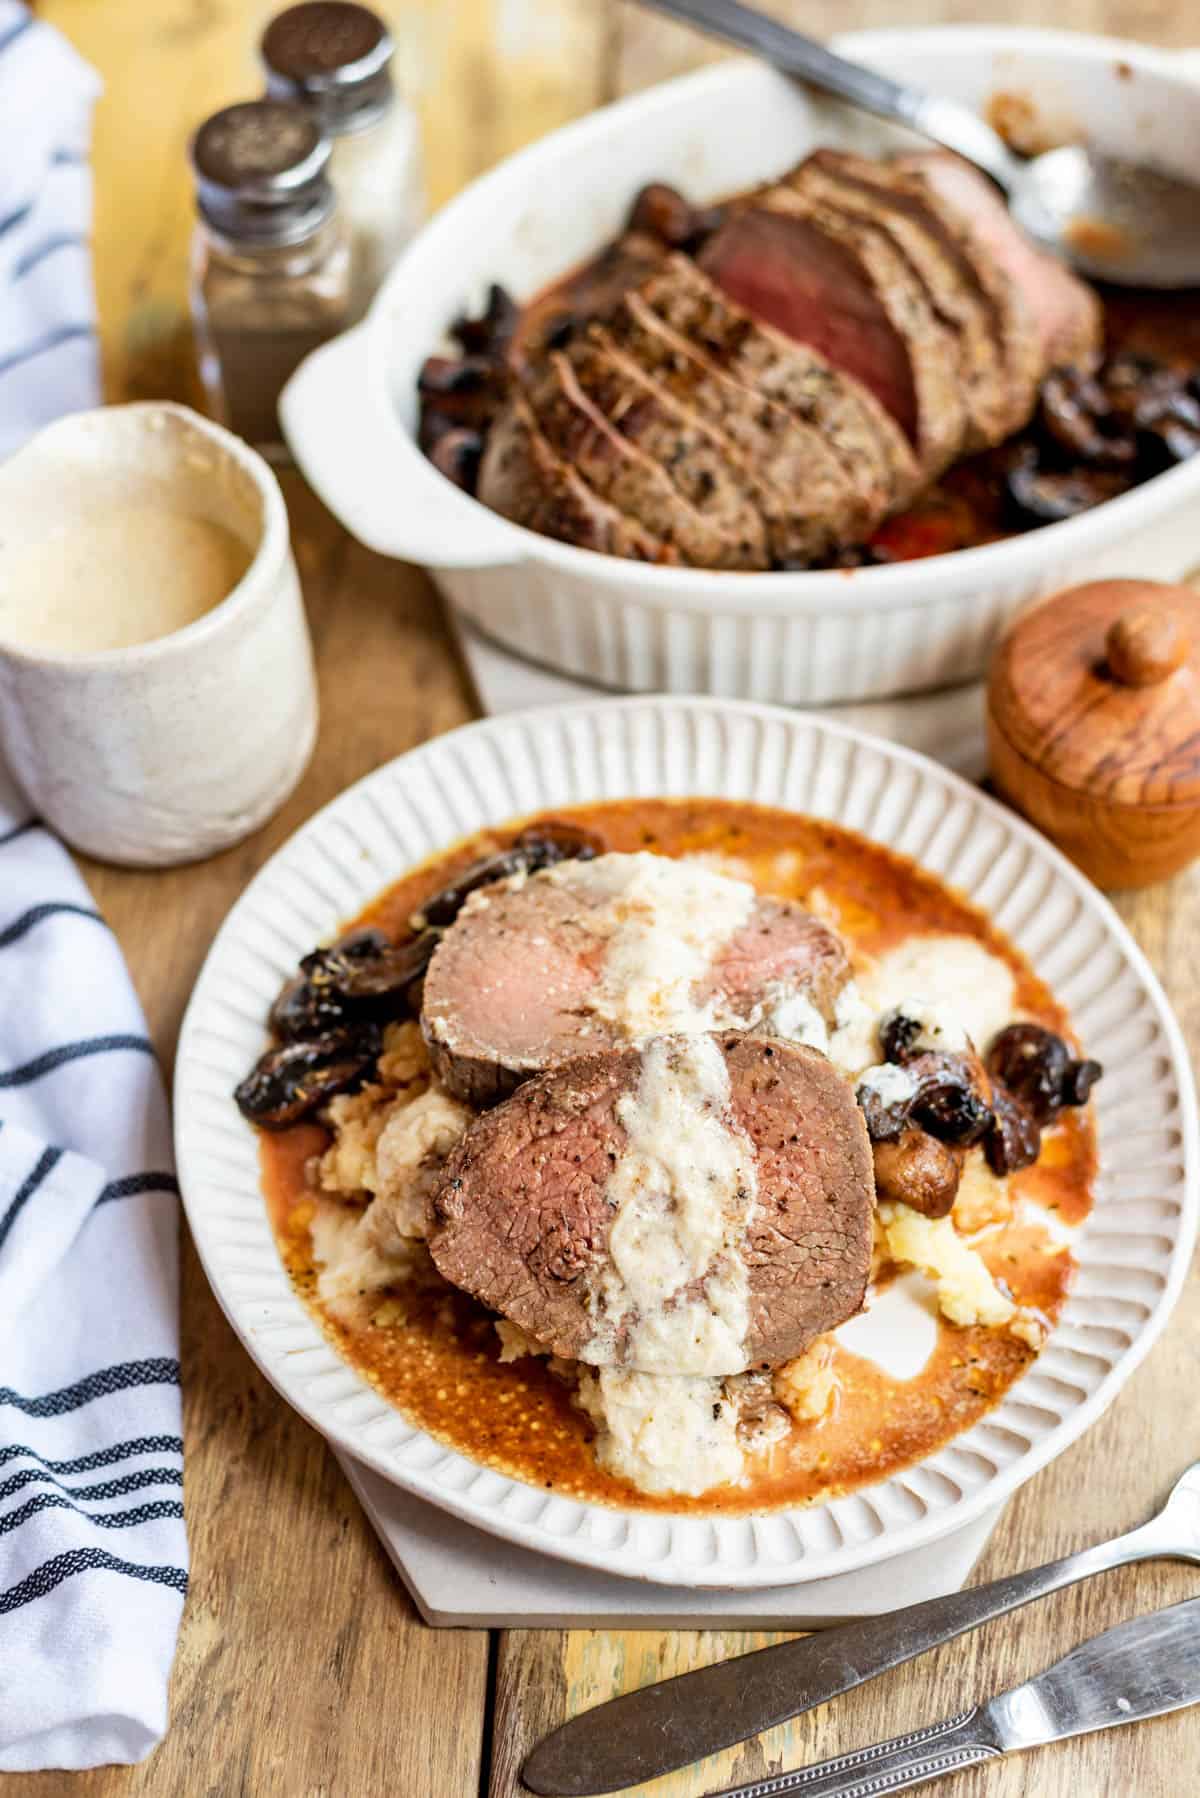 A plate of roasted beef tenderloin with mushrooms and cream sauce in front of the rest of the roast in a white baking dish and cream in a small jar.